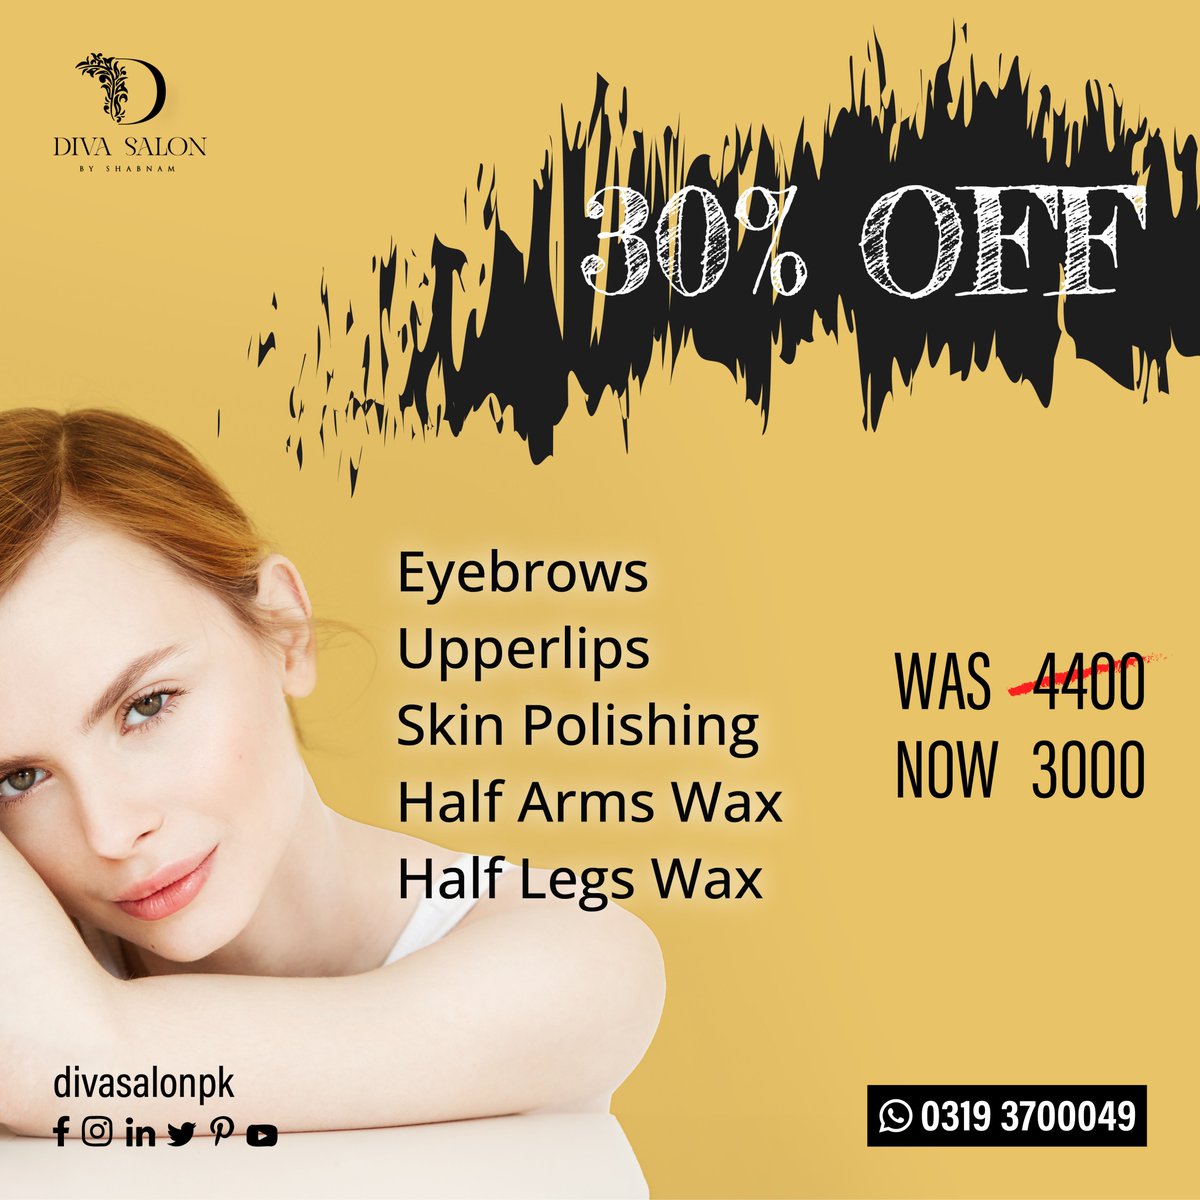 🚧⚠️Don’t Miss out. ⚠️ 🚧
Get more than 30% off with this amazing deal!
.
.
.

#divasalonpk #beautyservices #satellitetown #Gujranwala 
#appointment #beautyshop #beautyinnature #beautystudio #beautycreations #upperlips #beautyday #salons #eyebrows #beautytime #skinpolishing